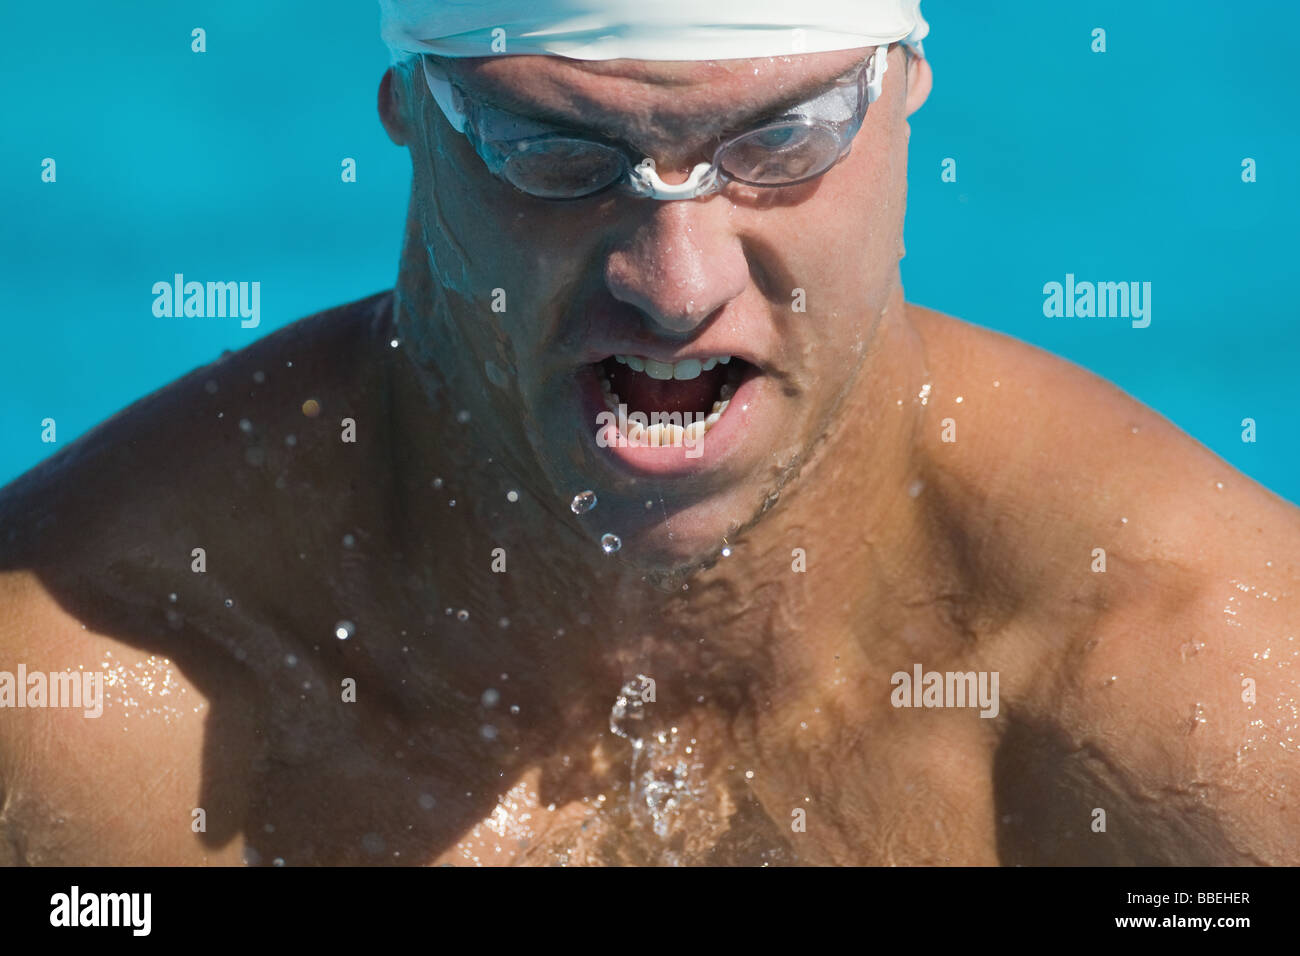 Young australian athlete wearing protective gear Stock Photo